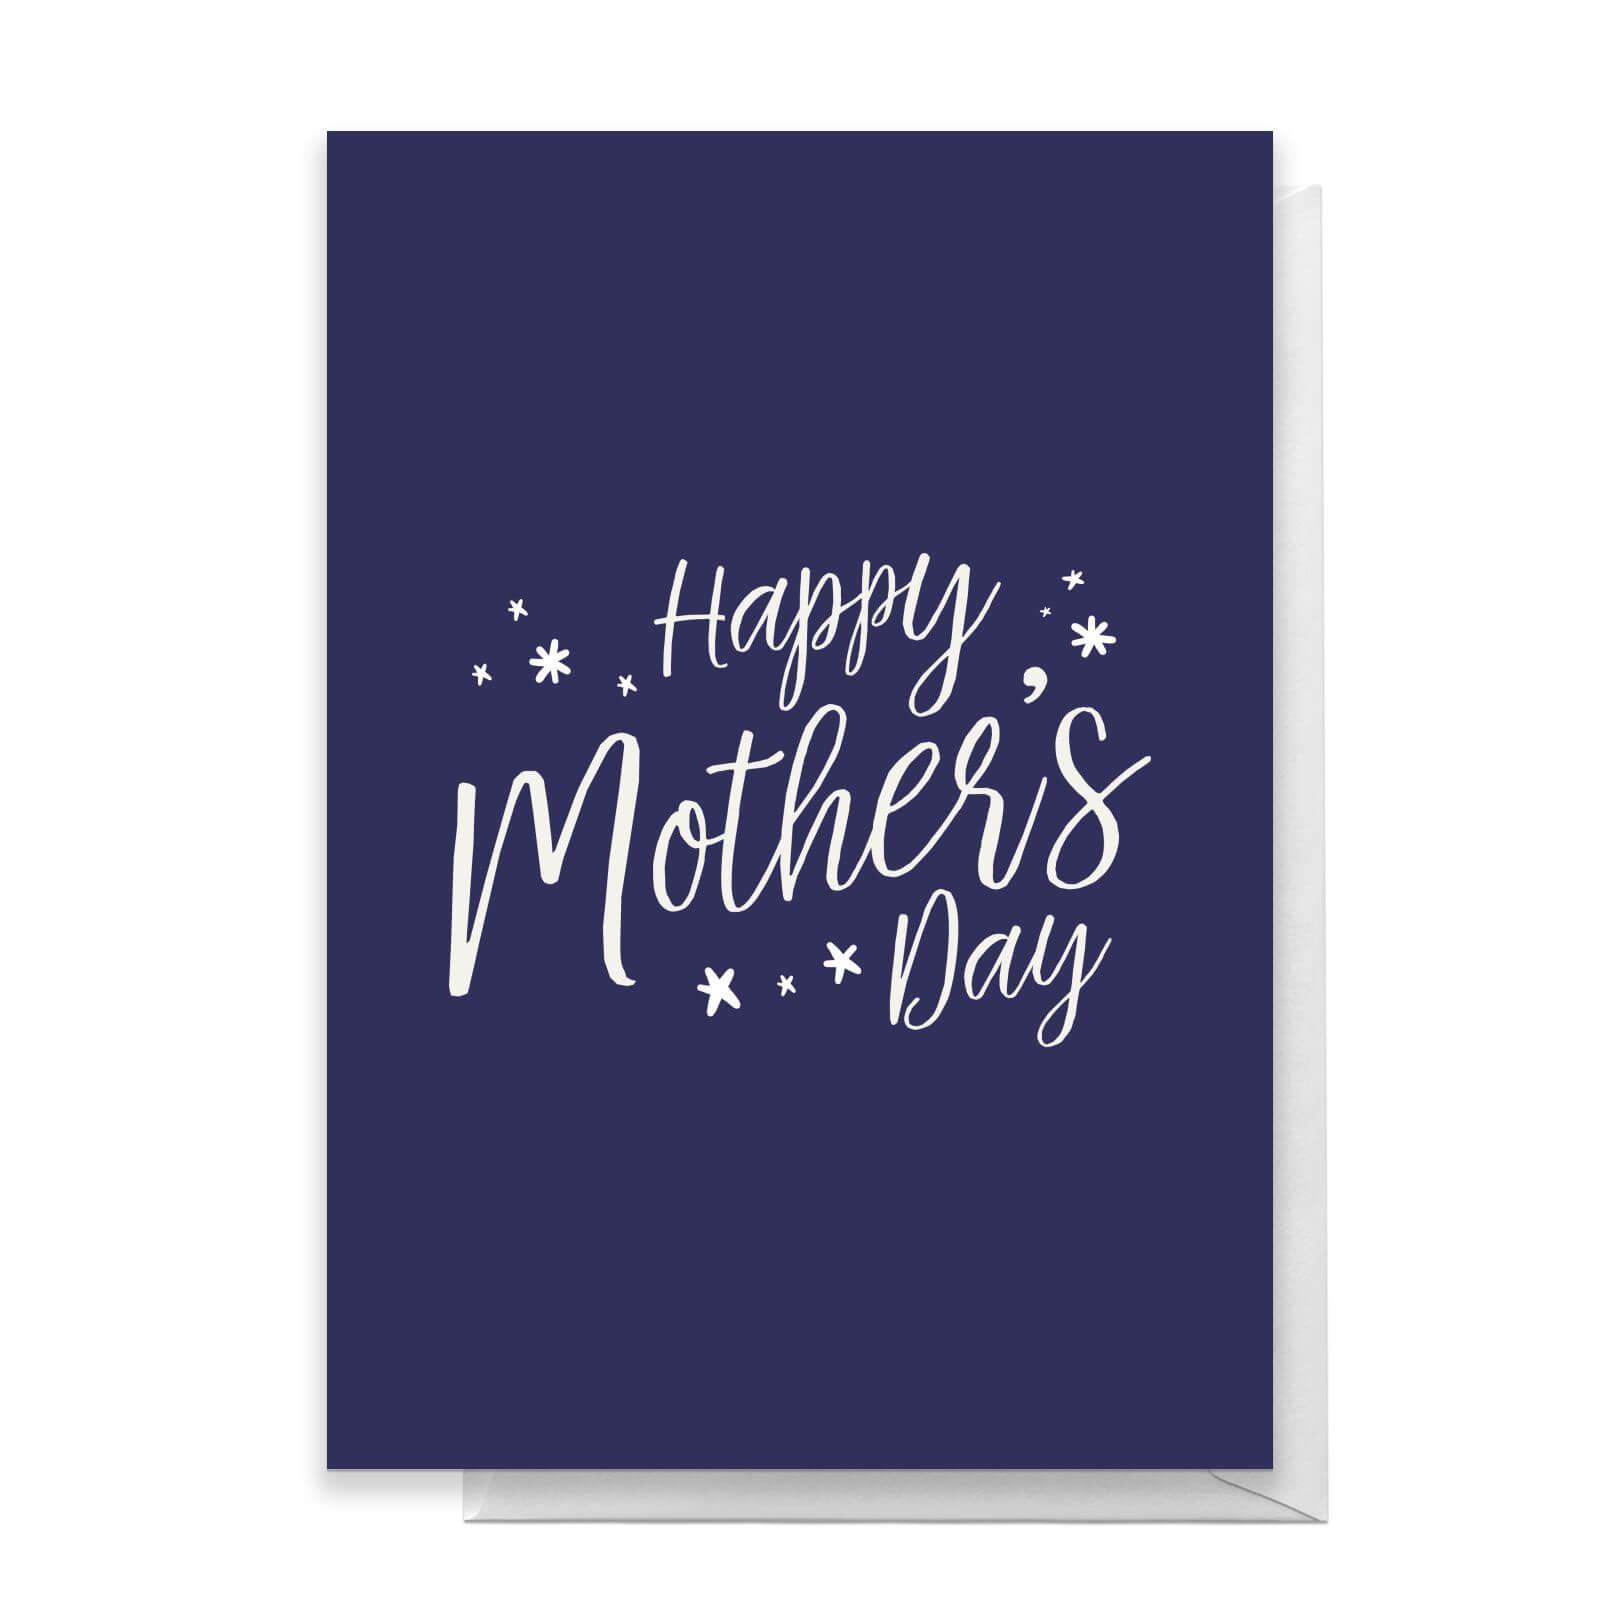 Happy Mother's Day  Greetings Card - Standard Card